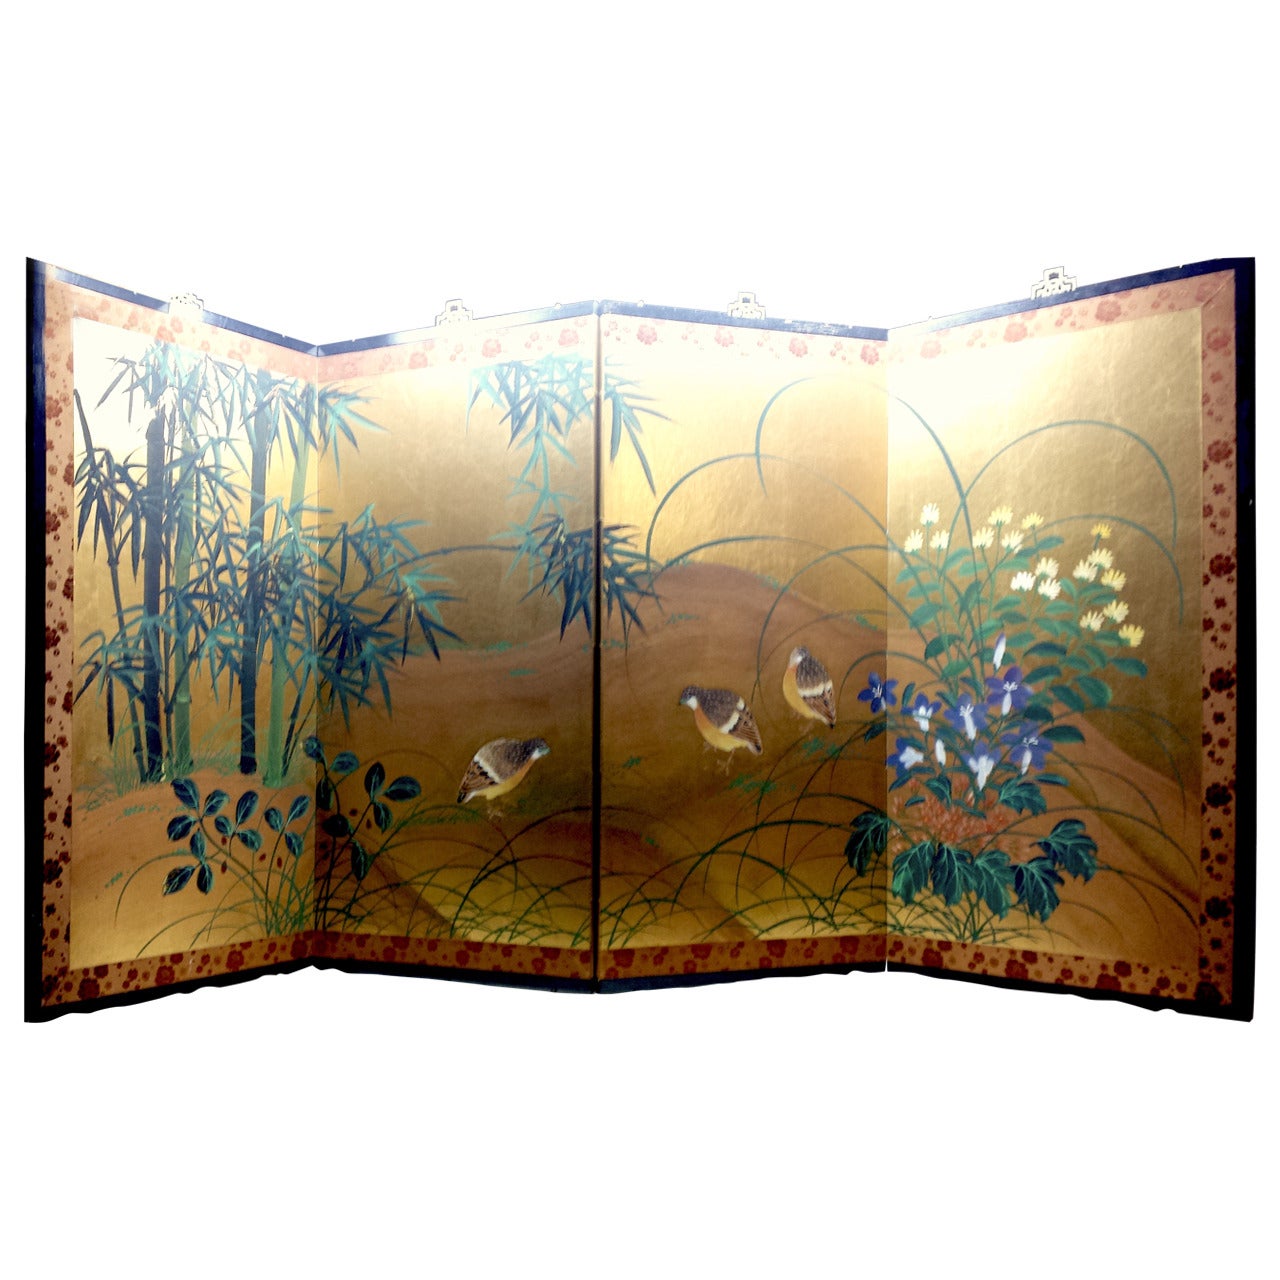 Beautiful Large Asian Screen, Byobu or Paravent Painted with Birds on Gold Leaf